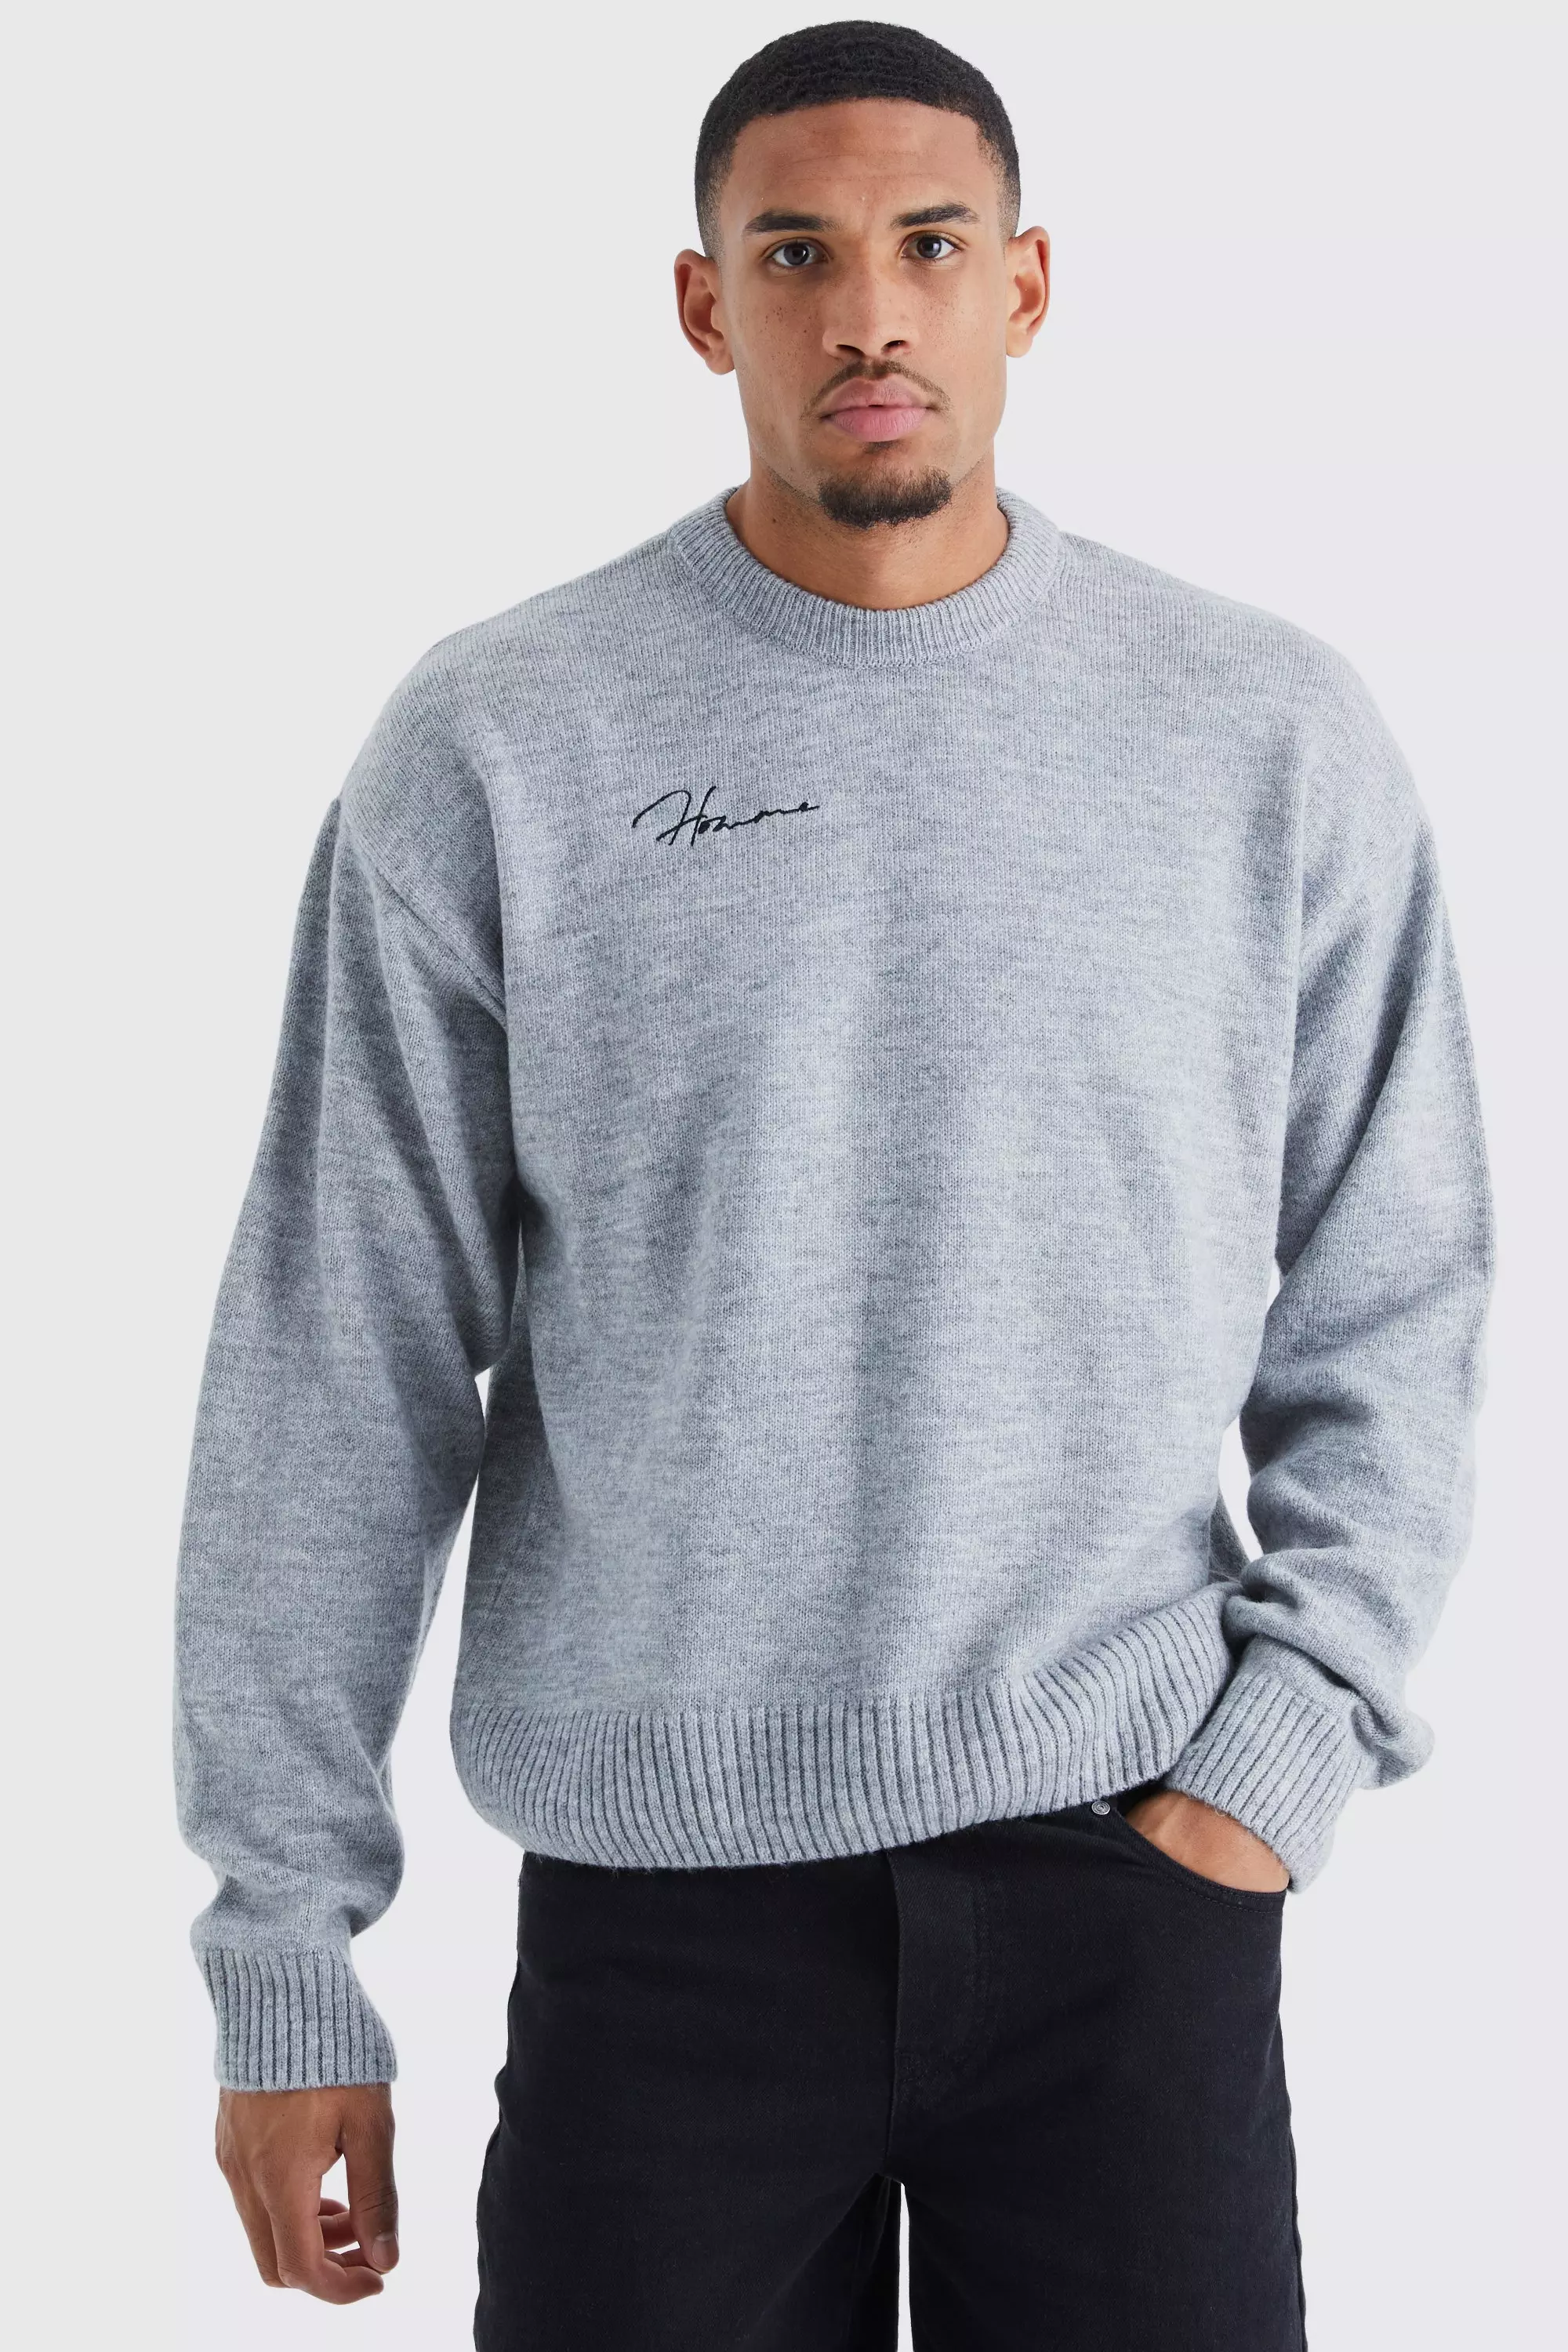 Charcoal Grey Tall Boxy Homme Extended Neck Brushed Rib Knit Sweater